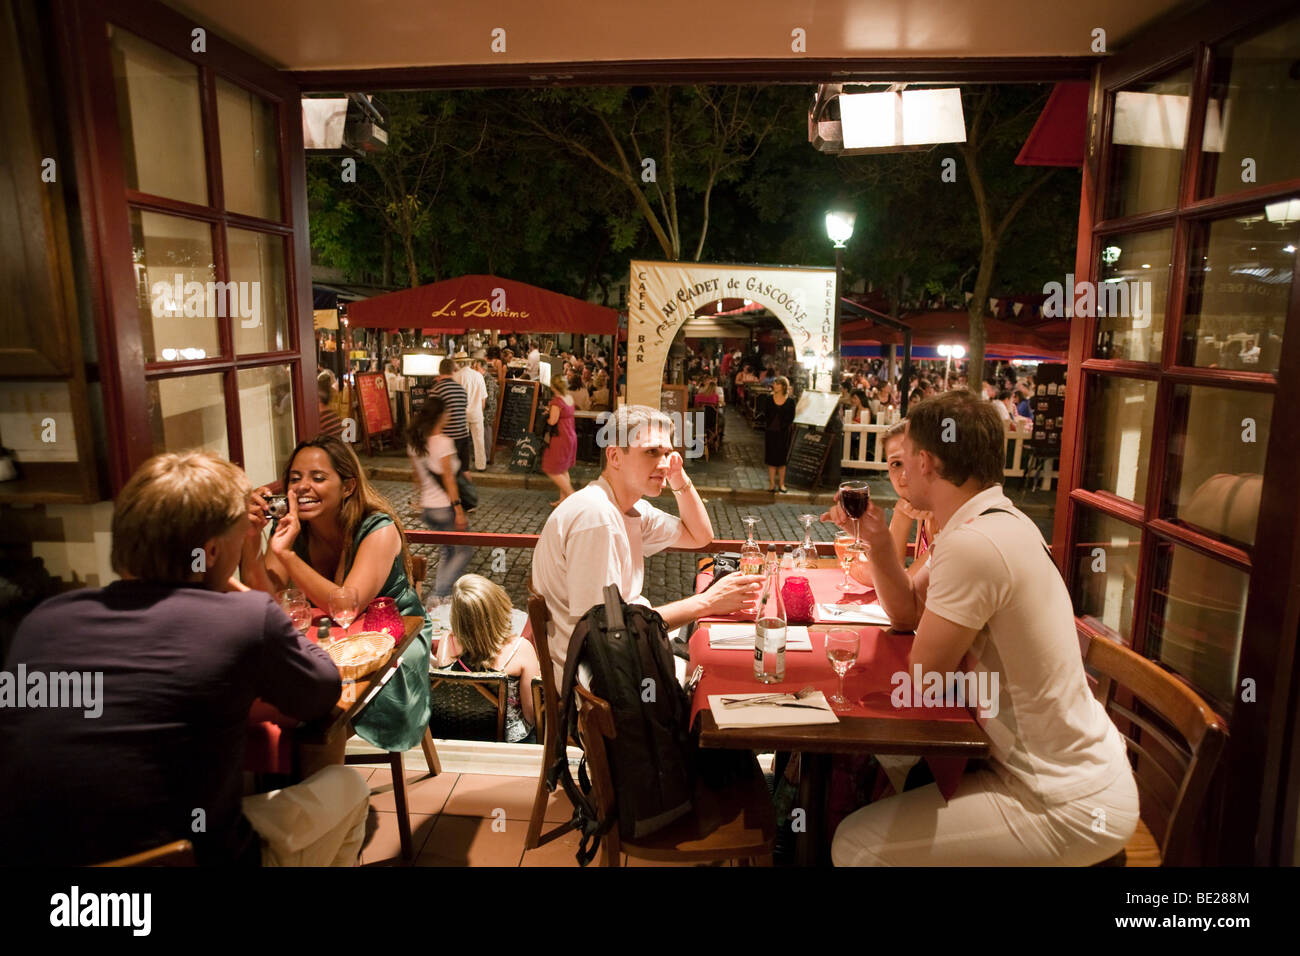 people eating in a cafe restaurant interior in the evening, Montmartre, Paris, France, Europe Stock Photo